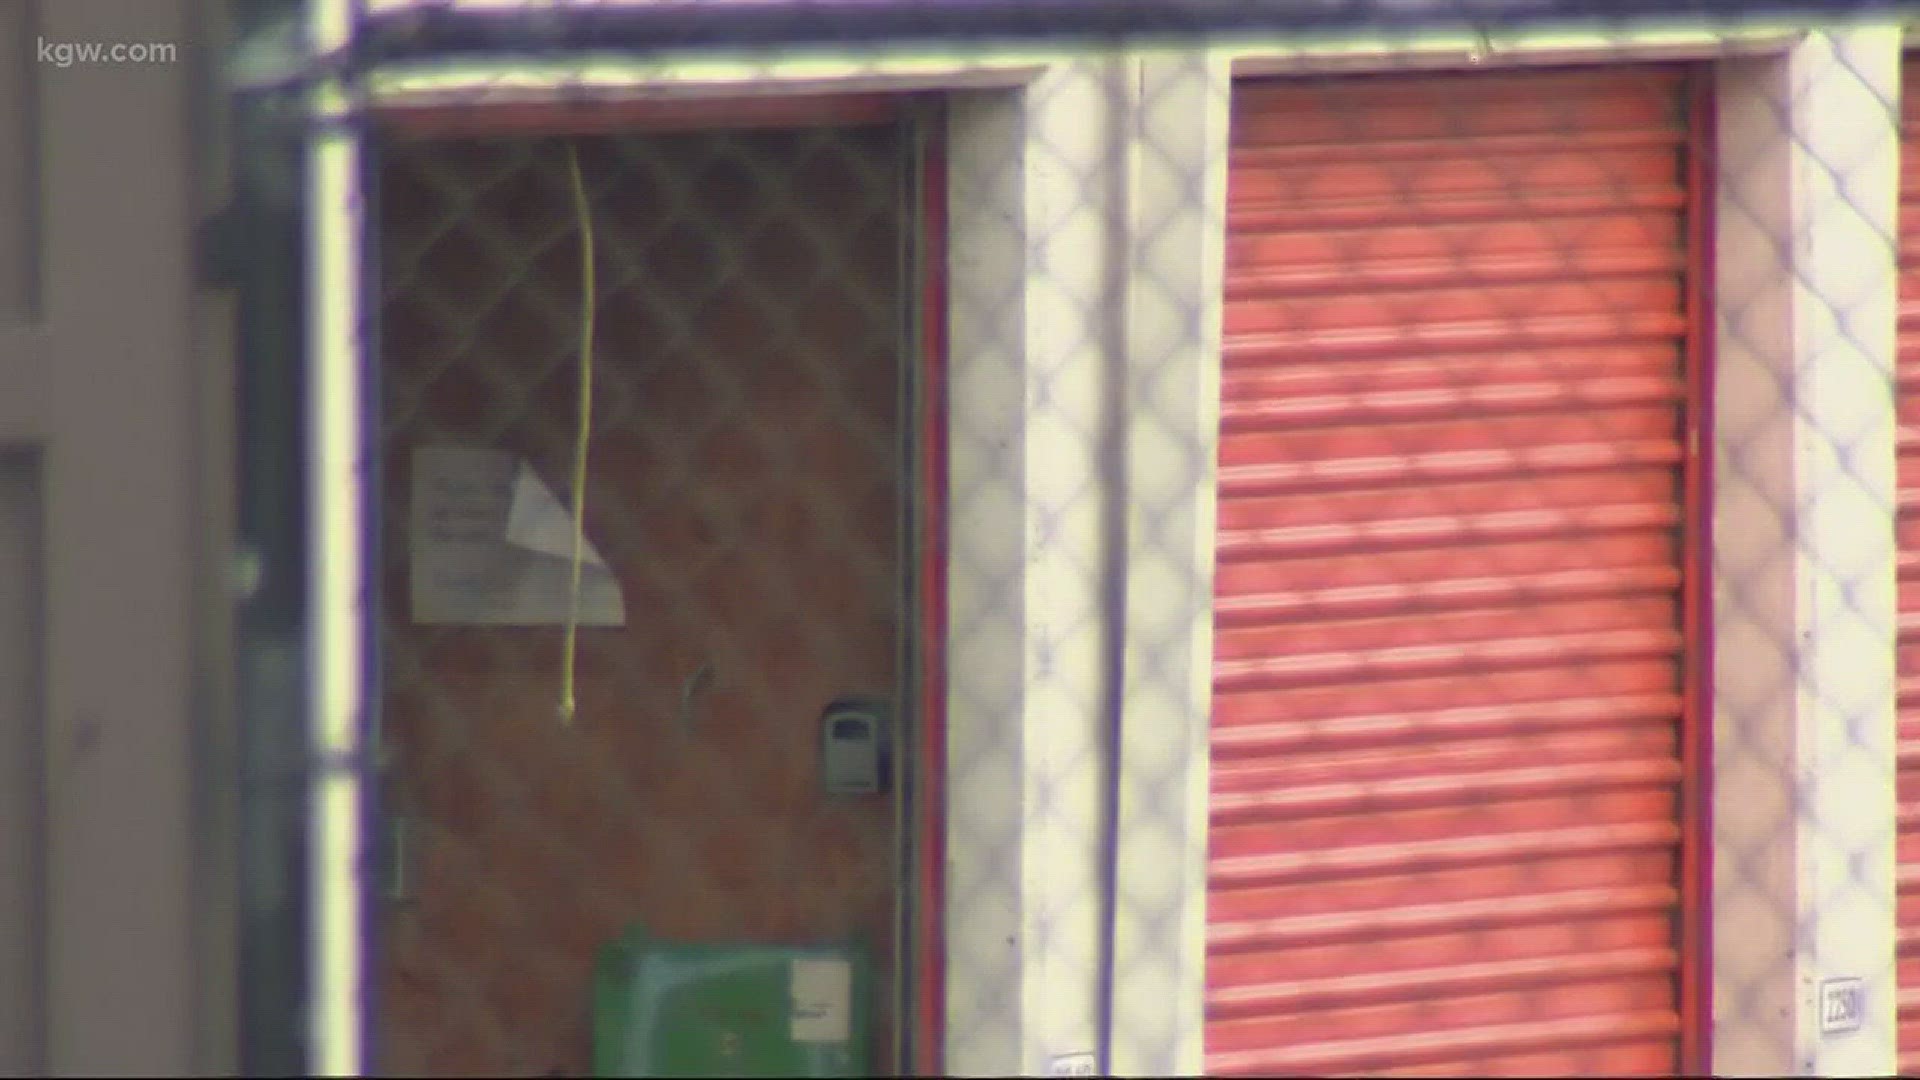 Woman says rats infested her storage unit